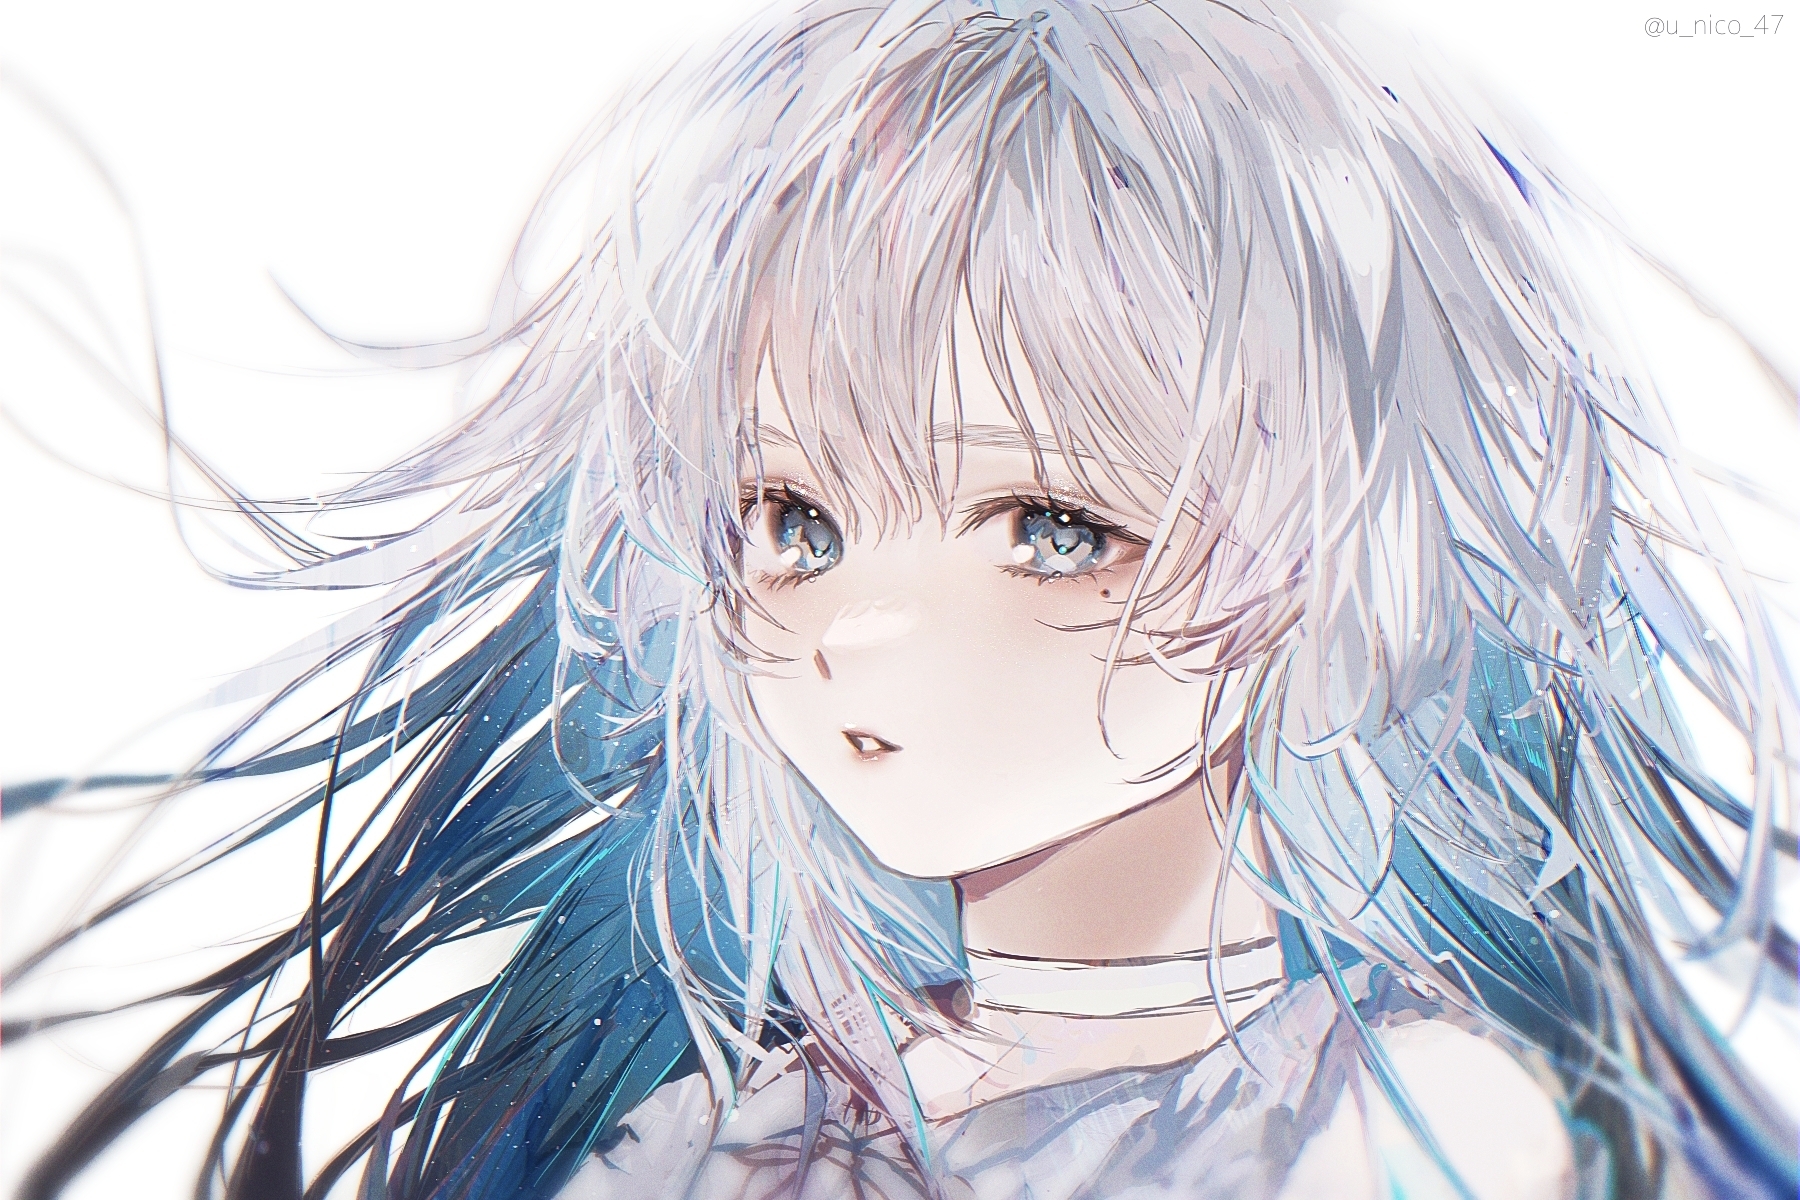 1. Silver-haired Blue-eyed Anime Girl - wide 4